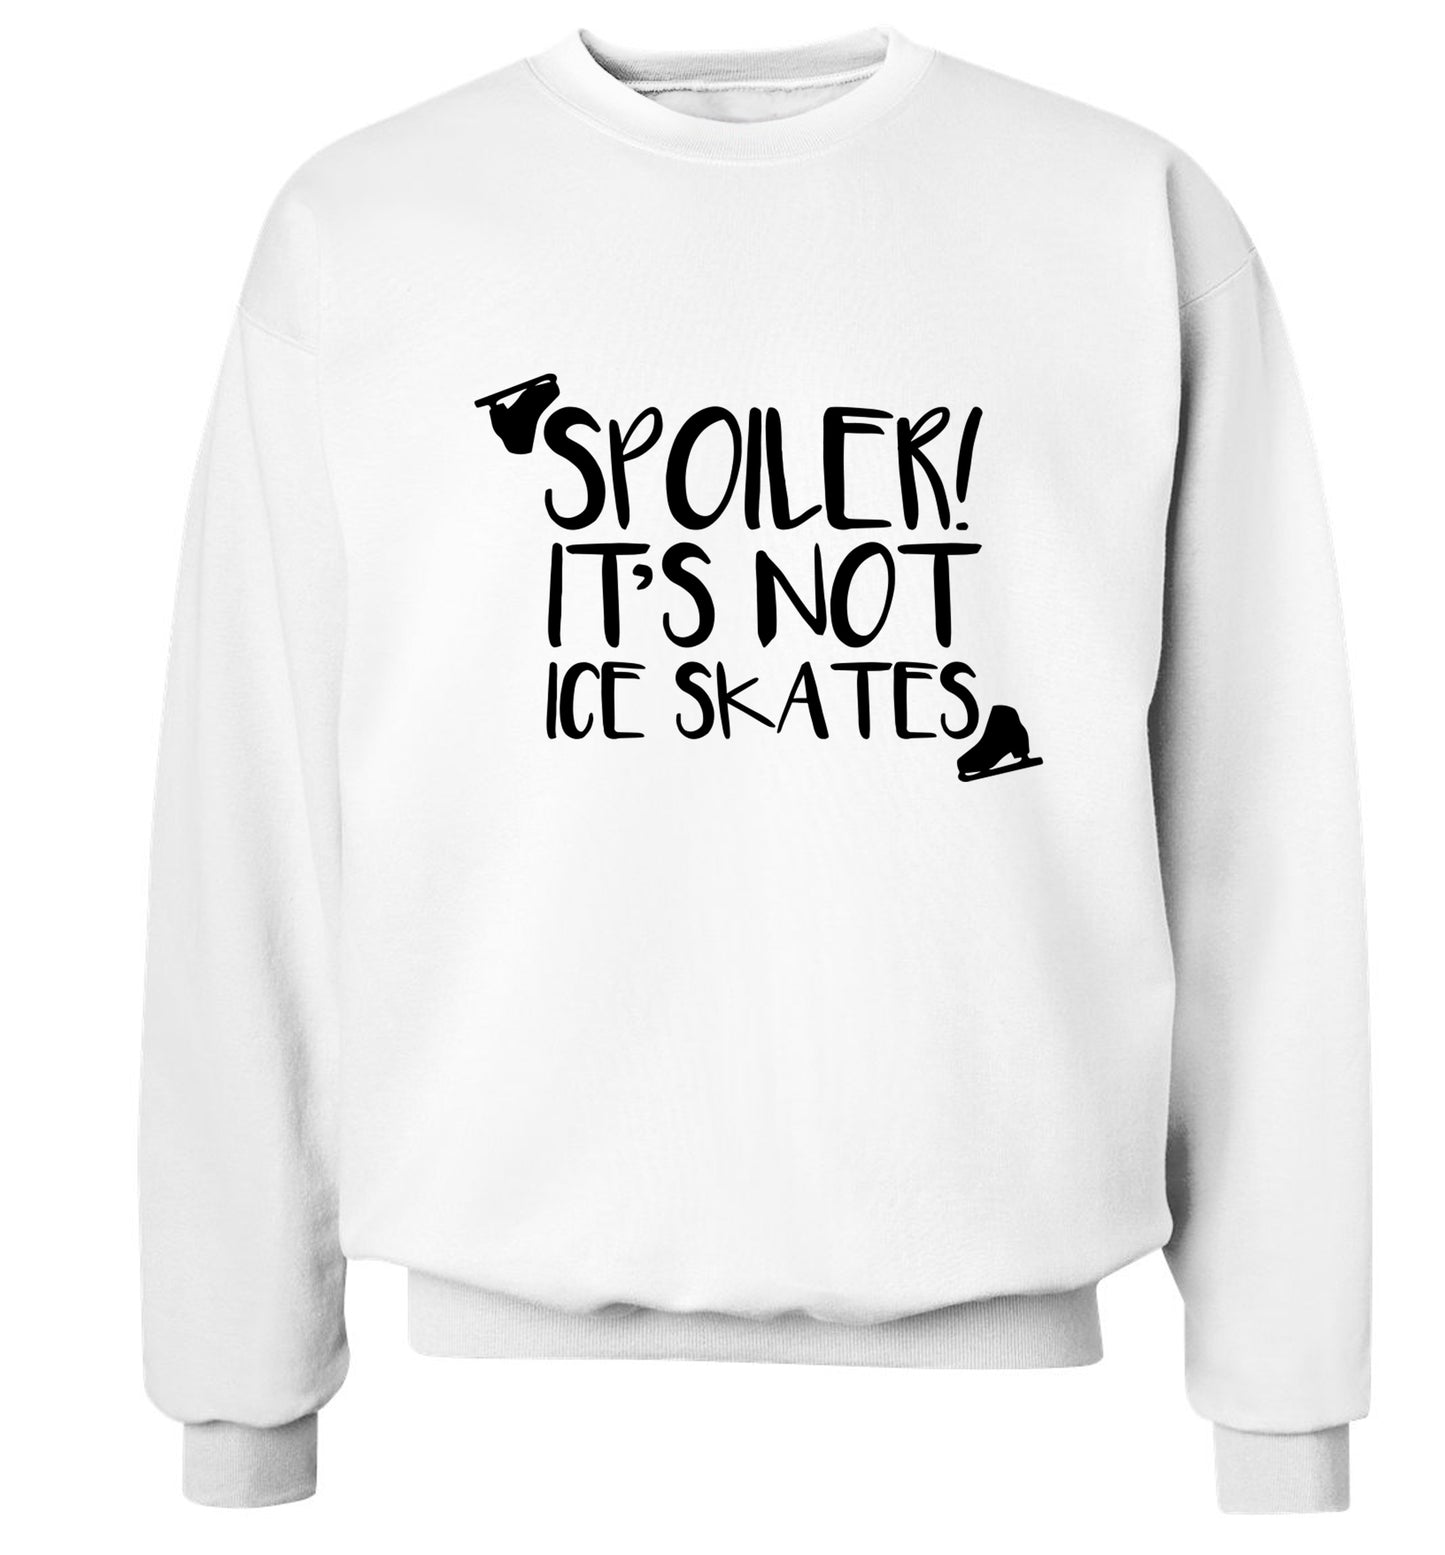 Spoiler it's Not a Pair of Ice Skates Adult's unisex white Sweater 2XL